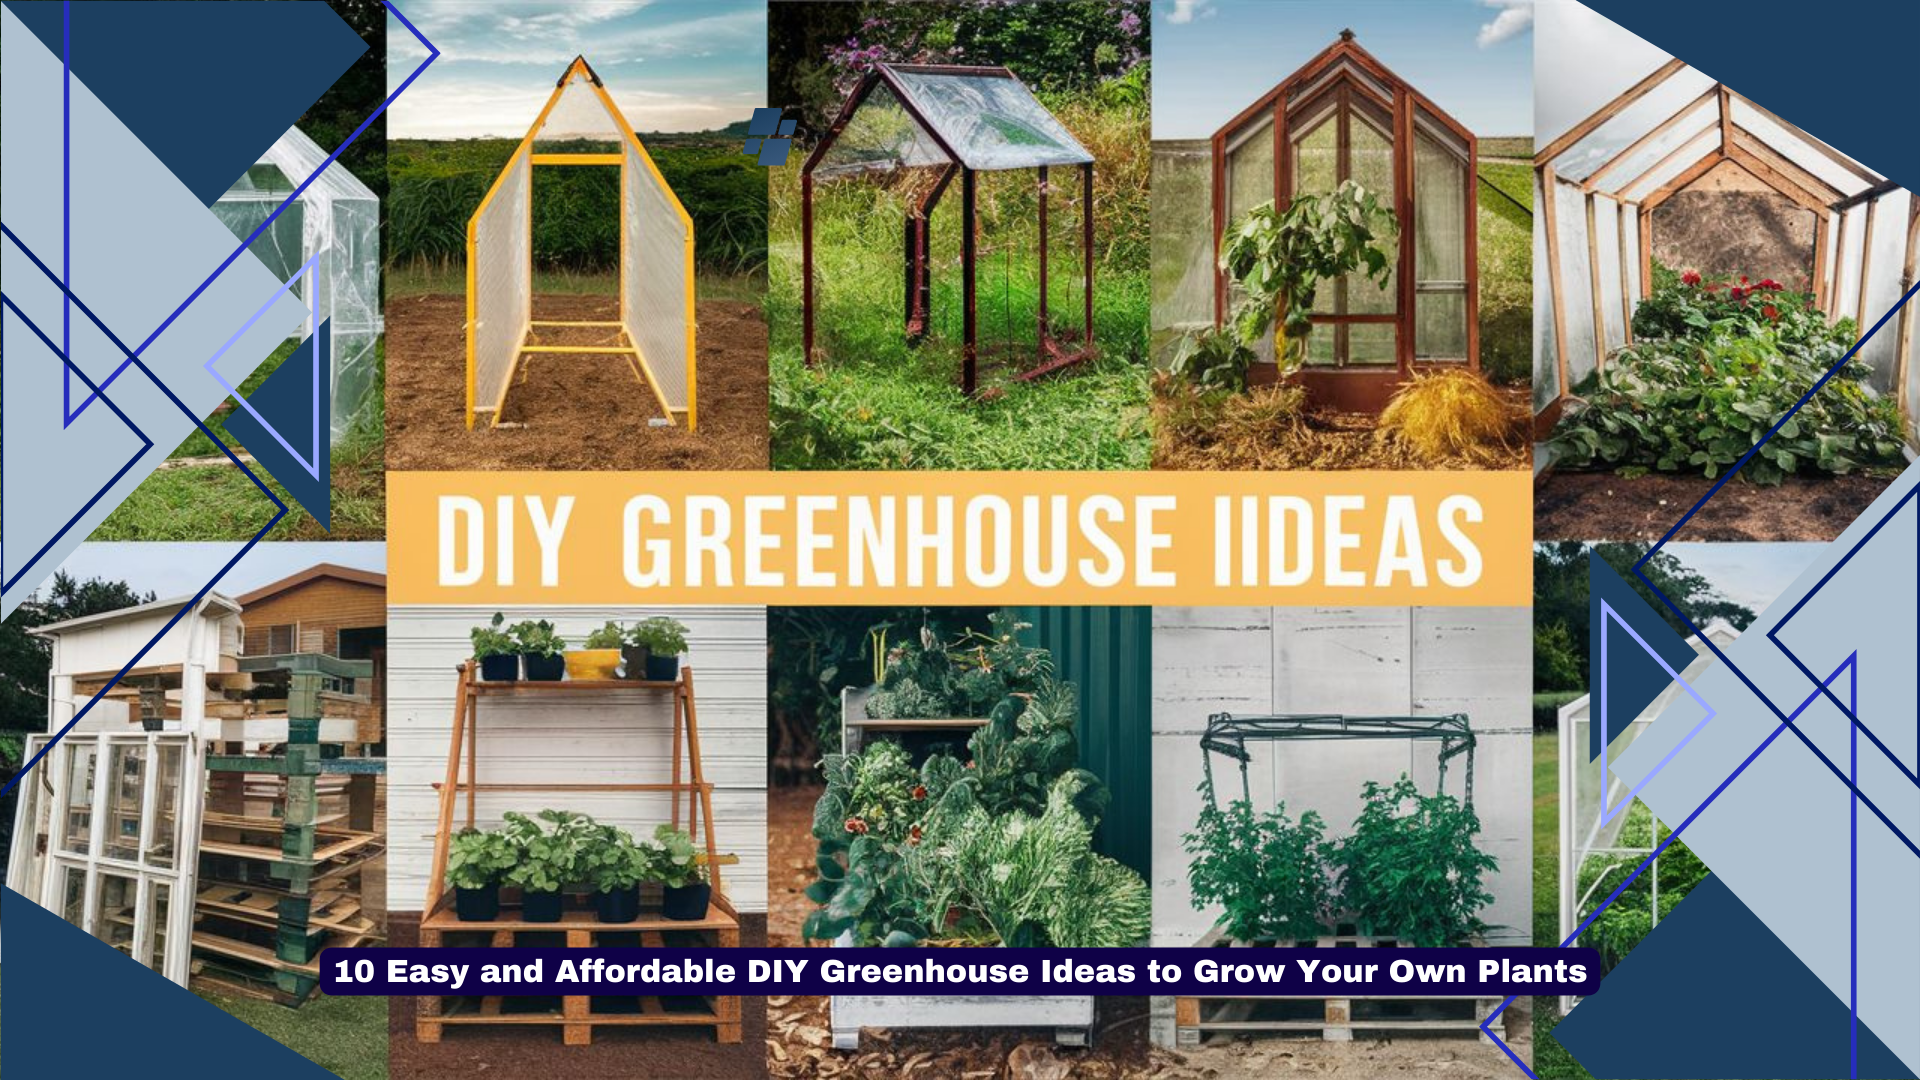 10 Easy and Affordable DIY Greenhouse Ideas to Grow Your Own Plants